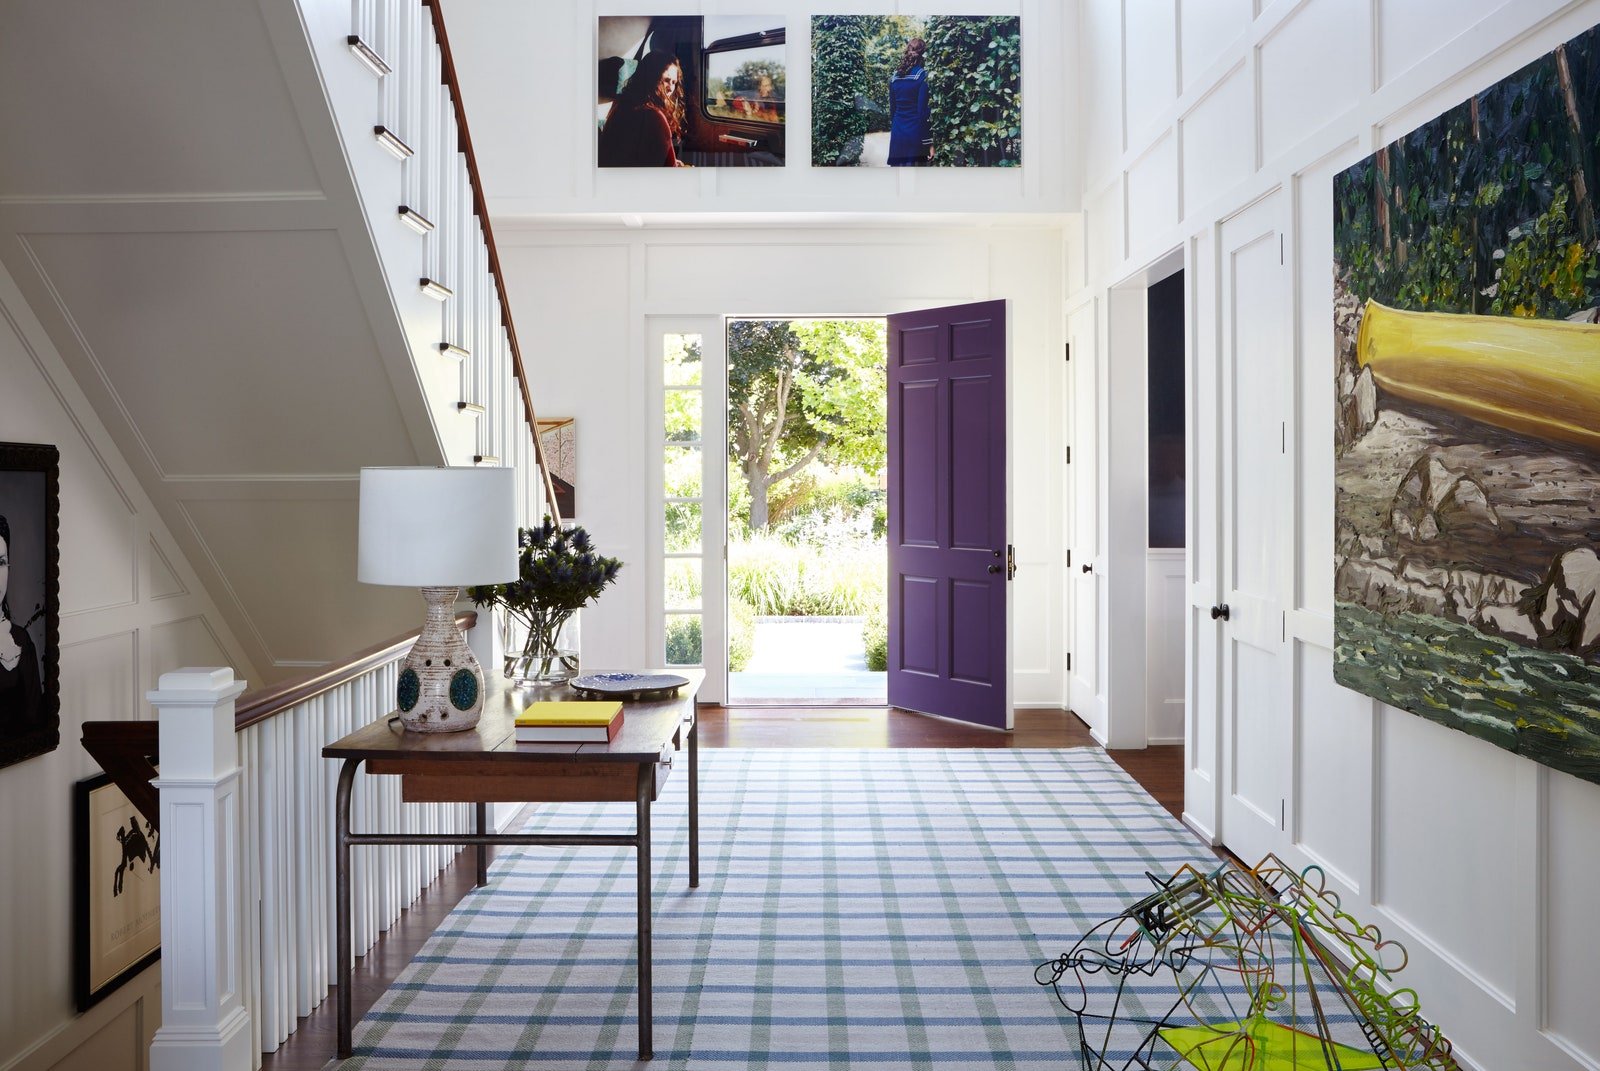  “She also loves plaid. The runner does a nice job of pulling all of the colors from the main floor together,” says Brown of the custom wool rug by Sacco Carpets. He sourced the vintage table and lamp from Robert Stilin’s East Hampton shop, and the p